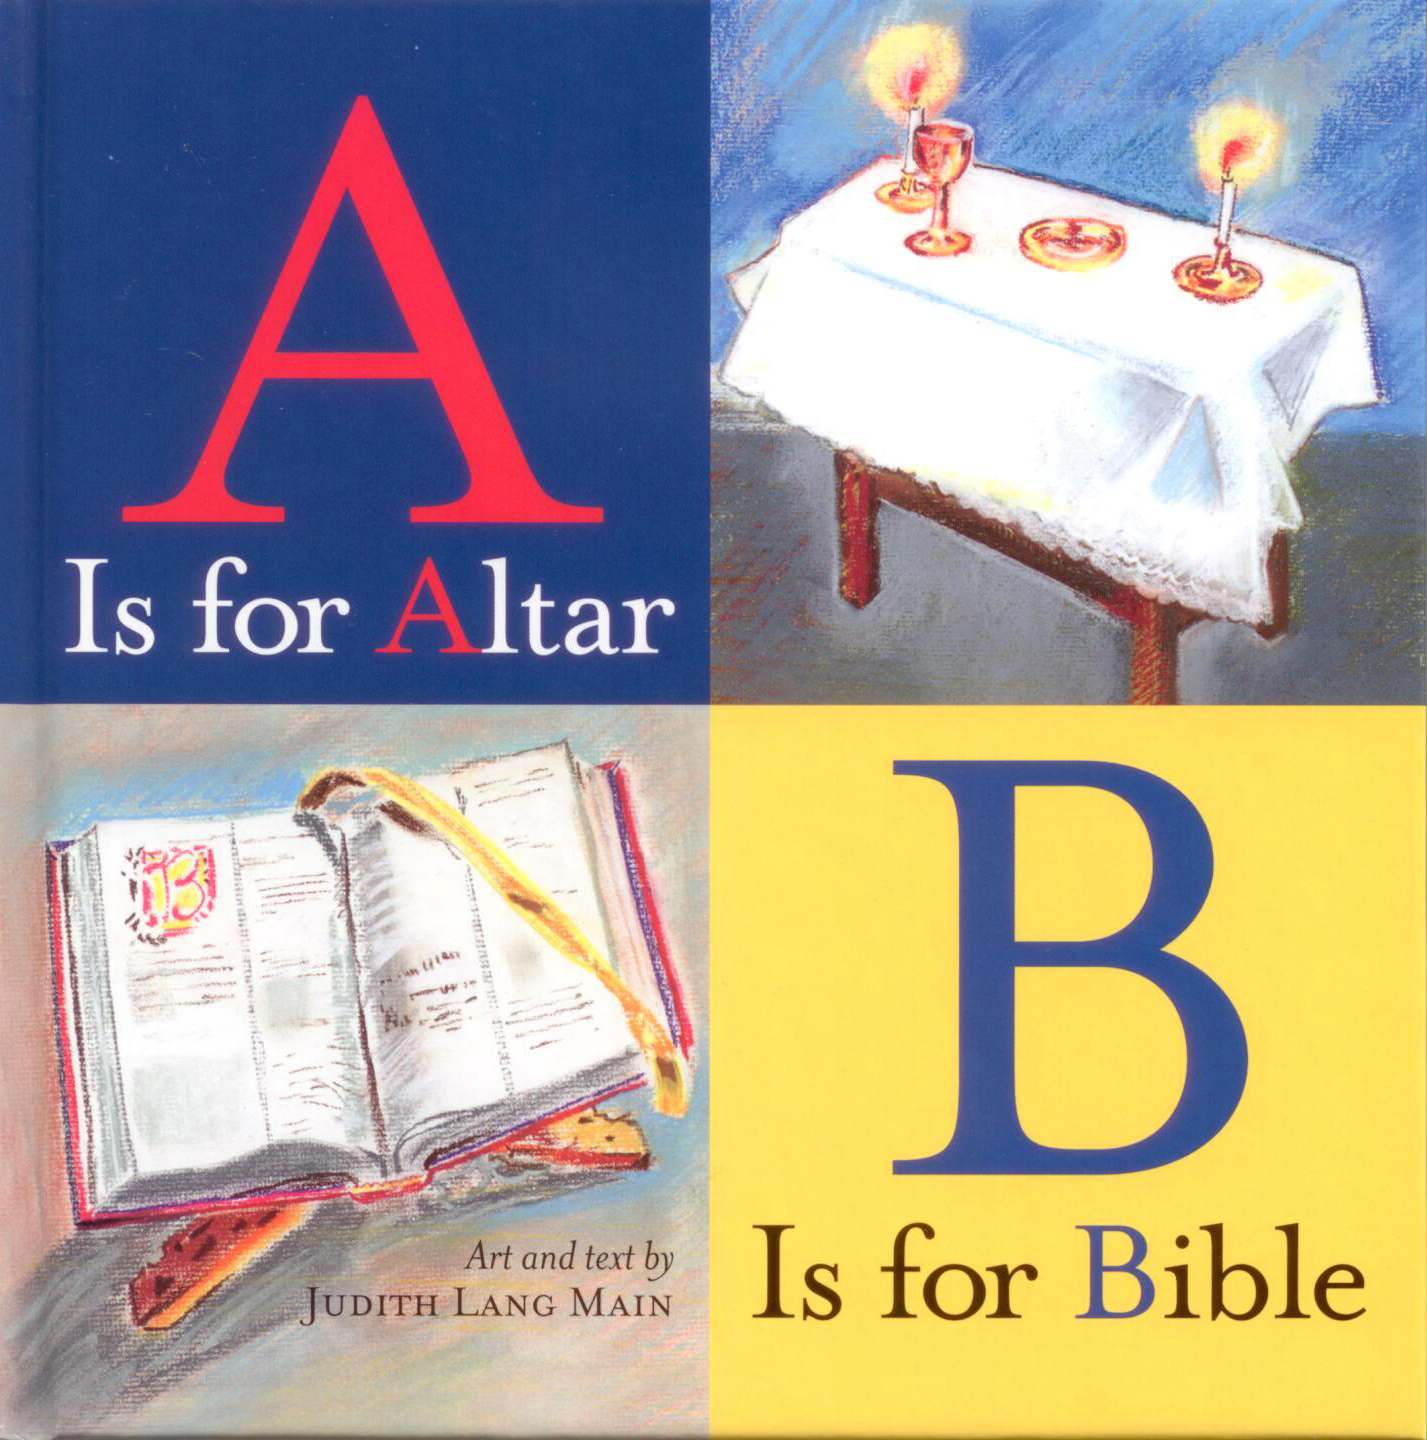 A Is for Altar B Is for Bible ByJudith Lang Main